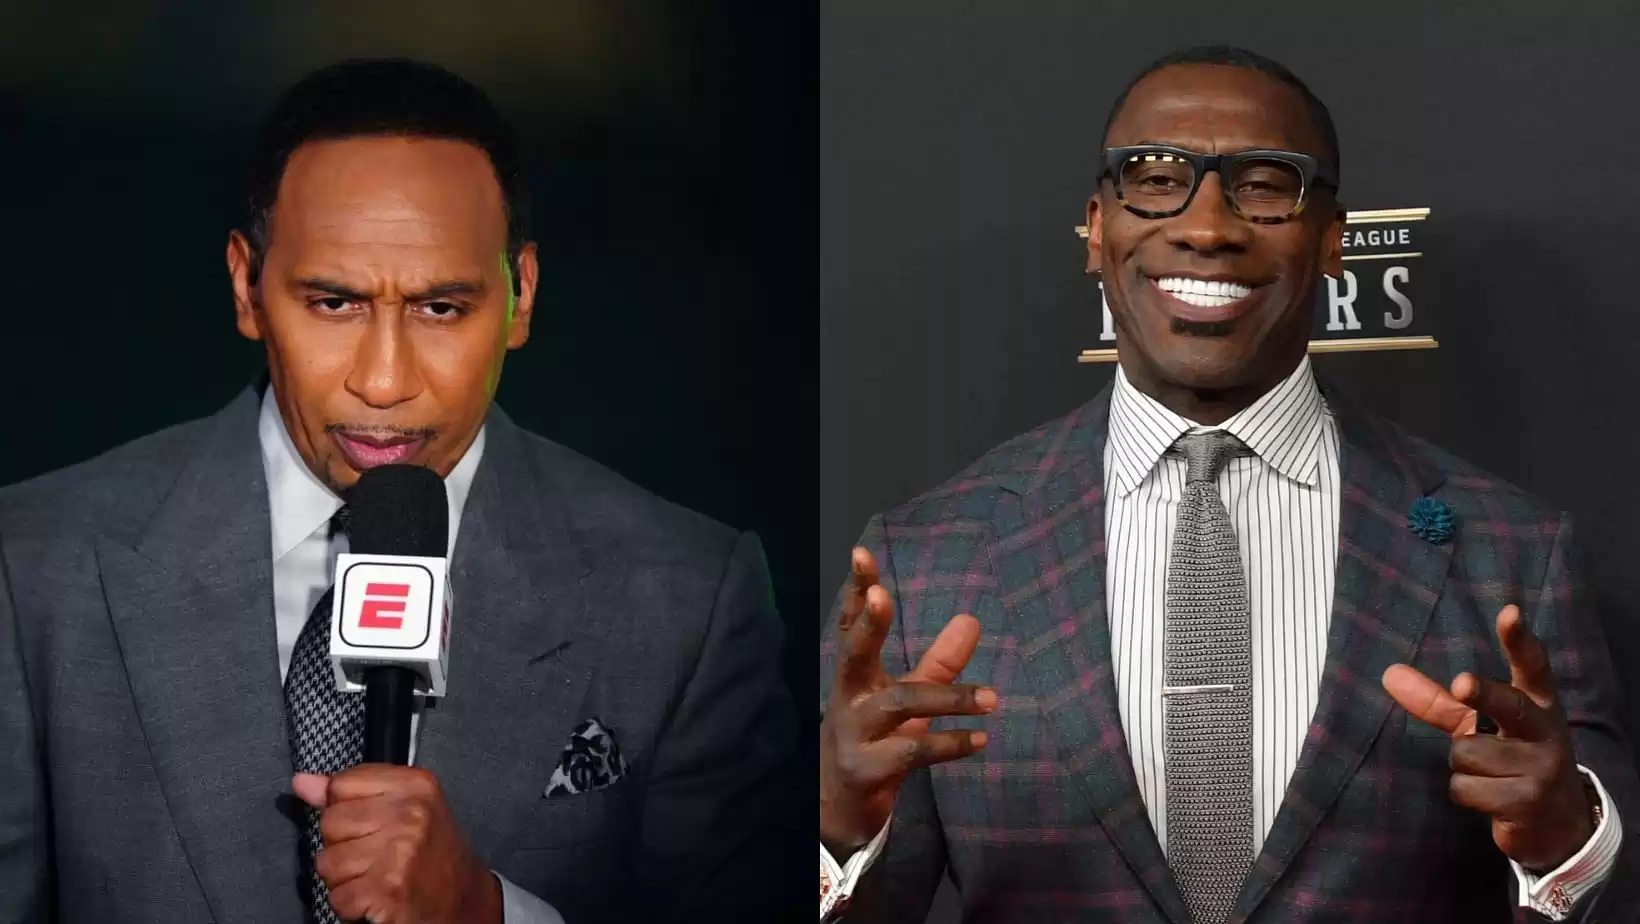 Possible Rewrite: "Shannon Sharpe Engages in Talks with ESPN for Groundbreaking Show Featuring Stephen A. Smith"